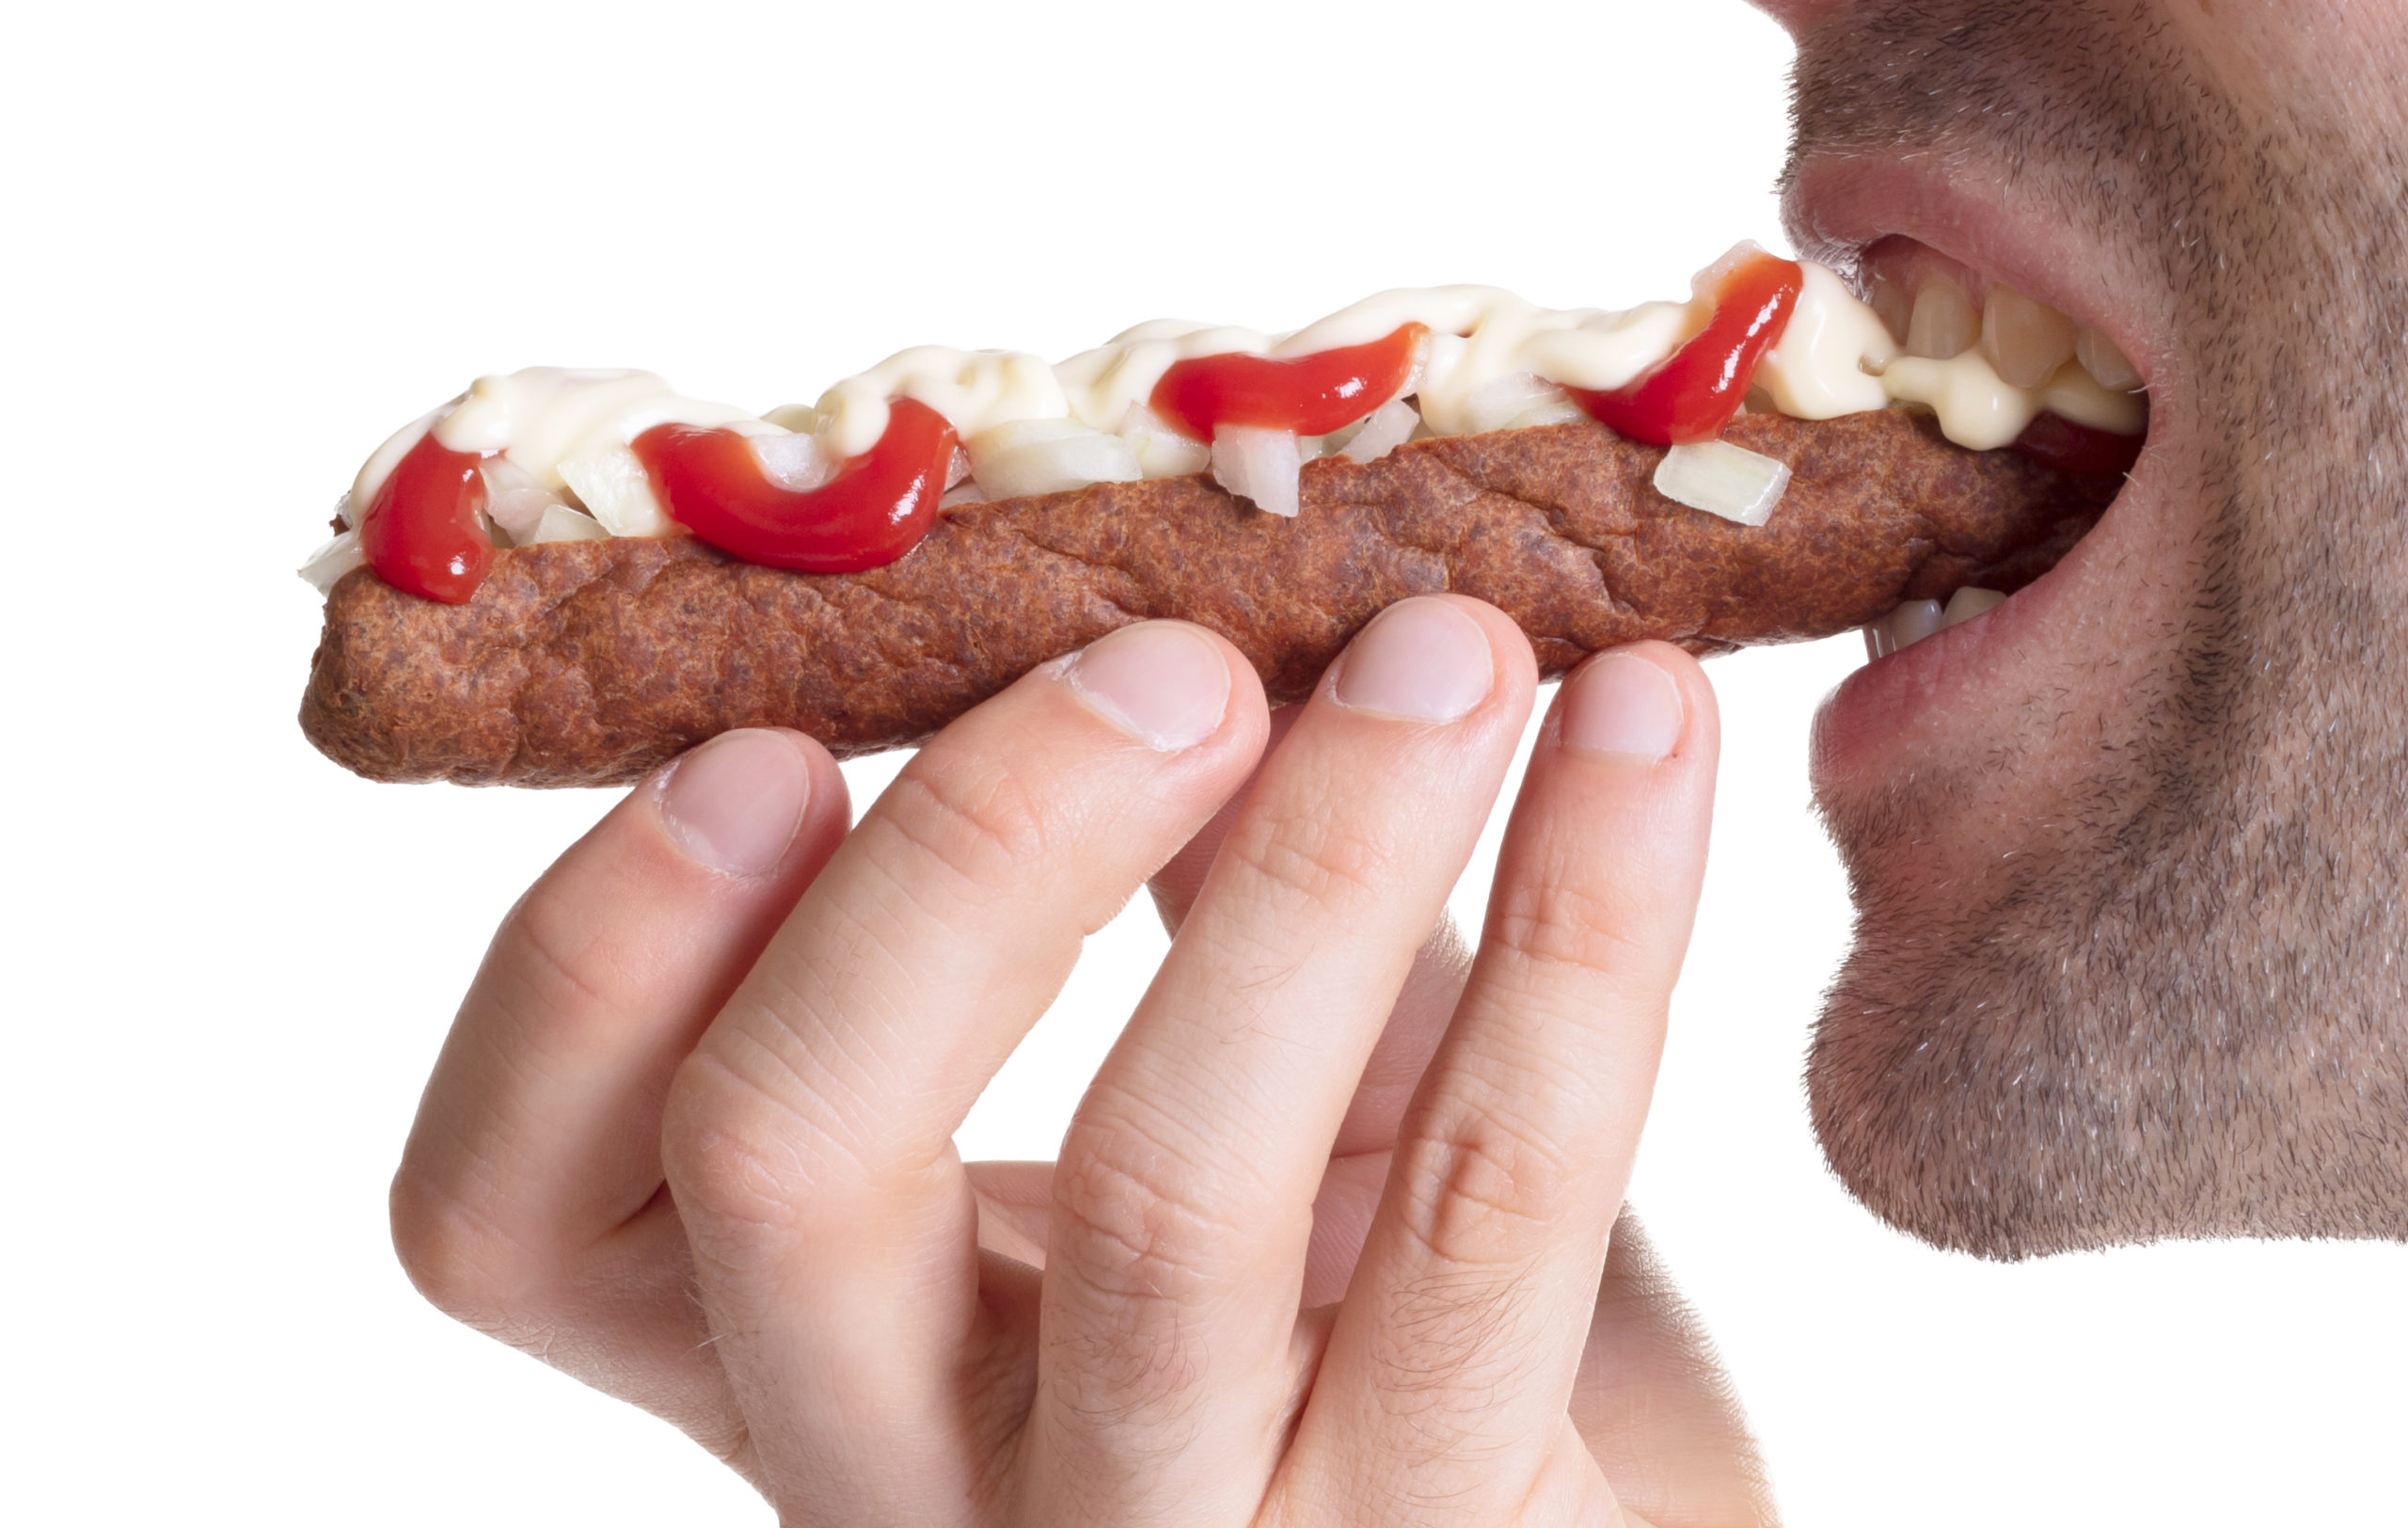 man eating a frikadel with ketchup, mayonnaise on chopped onions